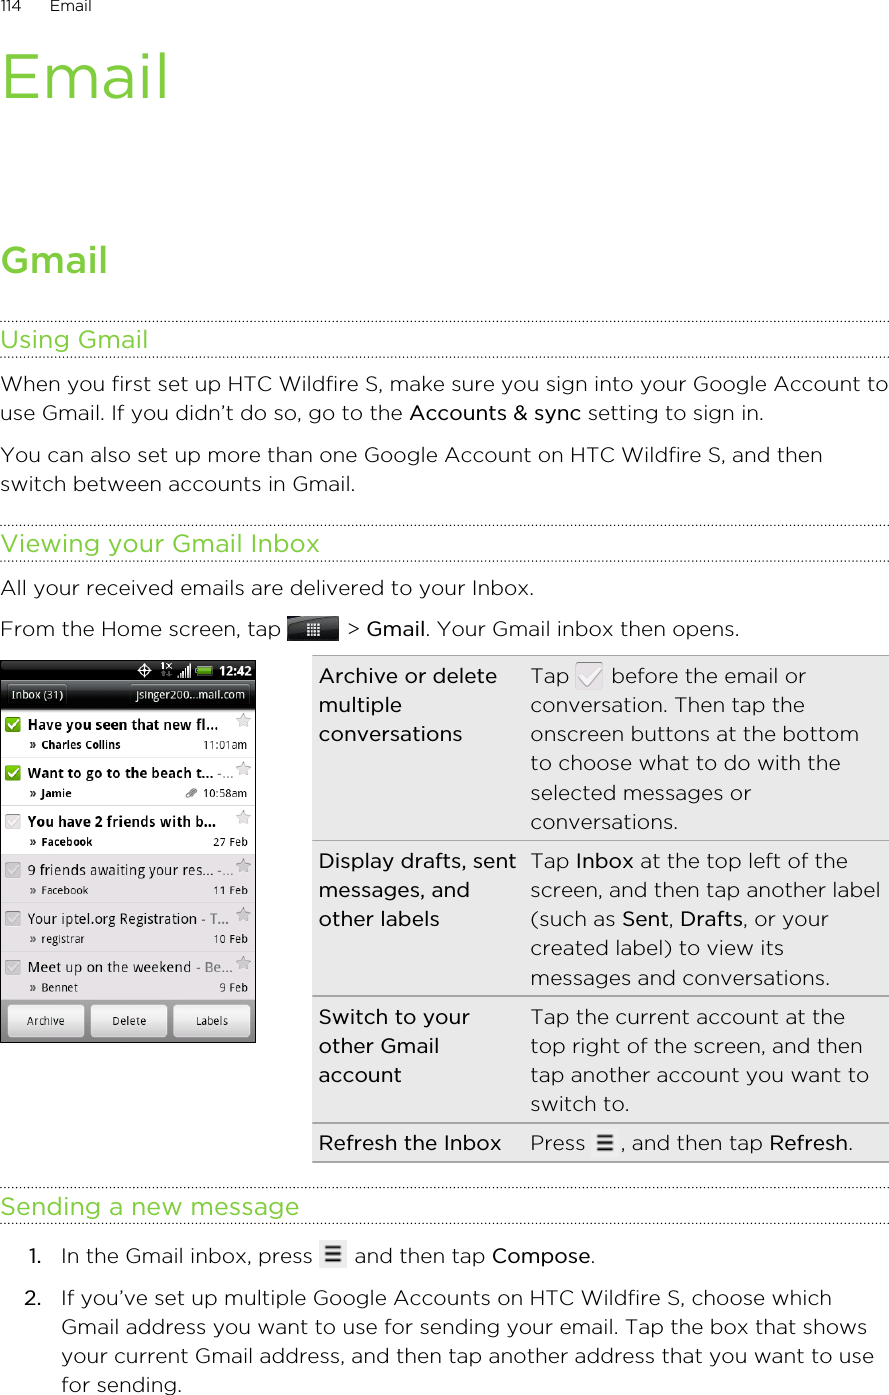 EmailGmailUsing GmailWhen you first set up HTC Wildfire S, make sure you sign into your Google Account touse Gmail. If you didn’t do so, go to the Accounts &amp; sync setting to sign in.You can also set up more than one Google Account on HTC Wildfire S, and thenswitch between accounts in Gmail.Viewing your Gmail InboxAll your received emails are delivered to your Inbox.From the Home screen, tap   &gt; Gmail. Your Gmail inbox then opens.Archive or deletemultipleconversationsTap   before the email orconversation. Then tap theonscreen buttons at the bottomto choose what to do with theselected messages orconversations.Display drafts, sentmessages, andother labelsTap Inbox at the top left of thescreen, and then tap another label(such as Sent, Drafts, or yourcreated label) to view itsmessages and conversations.Switch to yourother GmailaccountTap the current account at thetop right of the screen, and thentap another account you want toswitch to.Refresh the Inbox Press  , and then tap Refresh.Sending a new message1. In the Gmail inbox, press   and then tap Compose.2. If you’ve set up multiple Google Accounts on HTC Wildfire S, choose whichGmail address you want to use for sending your email. Tap the box that showsyour current Gmail address, and then tap another address that you want to usefor sending.114 Email